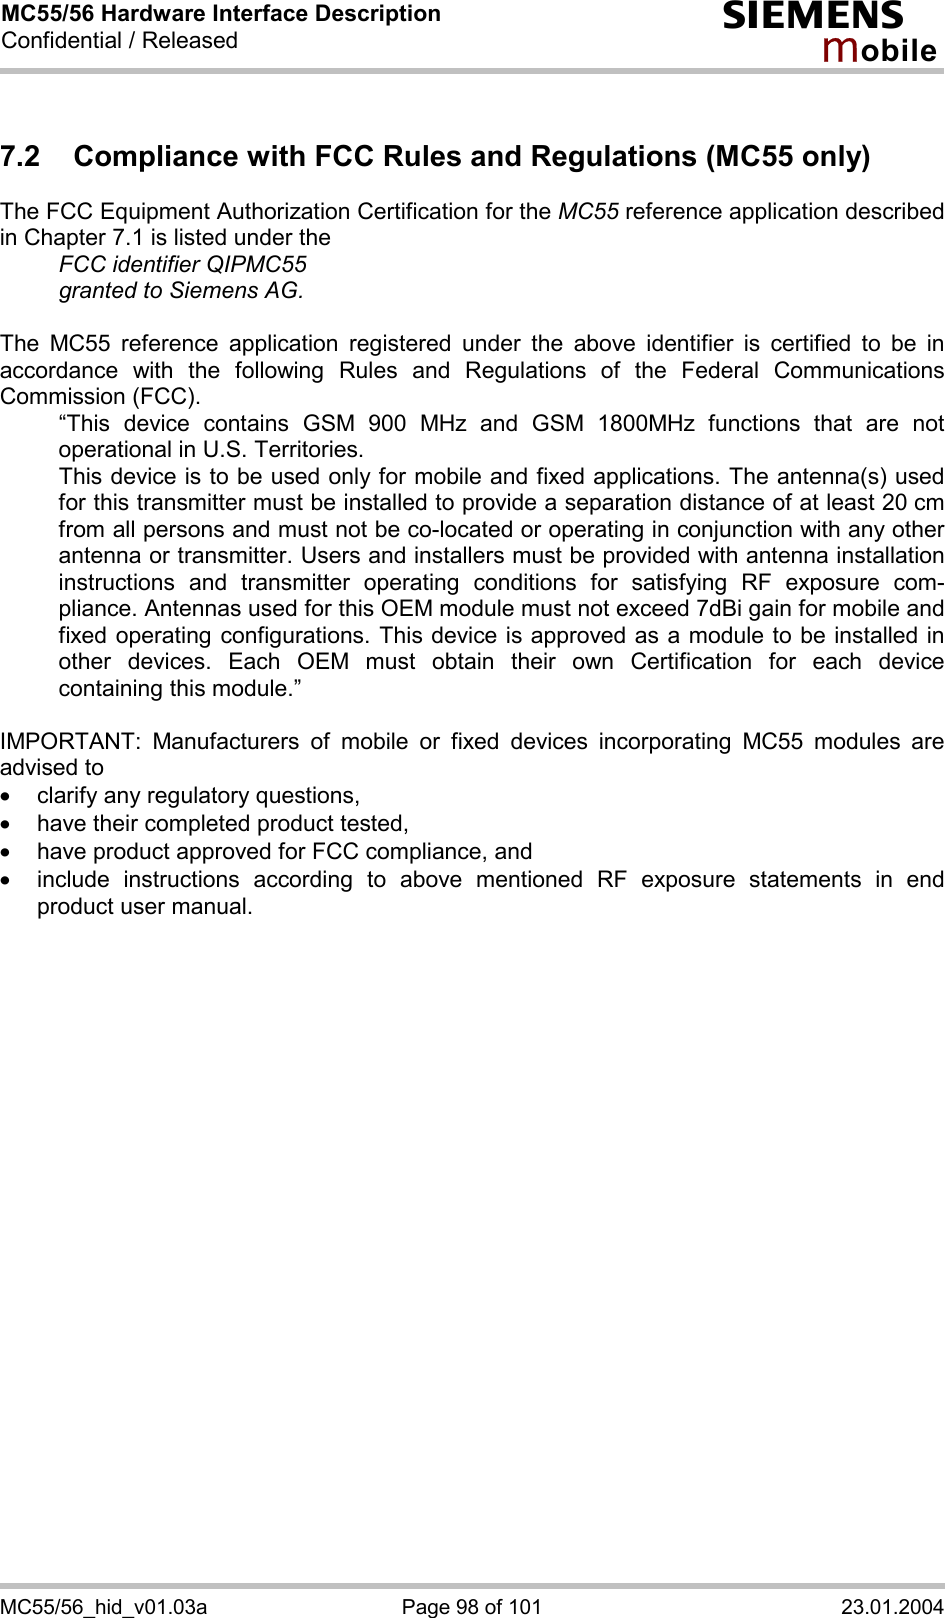 MC55/56 Hardware Interface Description Confidential / Released s mo b i l e MC55/56_hid_v01.03a  Page 98 of 101  23.01.2004 7.2  Compliance with FCC Rules and Regulations (MC55 only) The FCC Equipment Authorization Certification for the MC55 reference application described in Chapter 7.1 is listed under the   FCC identifier QIPMC55   granted to Siemens AG.   The MC55 reference application registered under the above identifier is certified to be in accordance with the following Rules and Regulations of the Federal Communications Commission (FCC).    “This device contains GSM 900 MHz and GSM 1800MHz functions that are not operational in U.S. Territories.    This device is to be used only for mobile and fixed applications. The antenna(s) used for this transmitter must be installed to provide a separation distance of at least 20 cm from all persons and must not be co-located or operating in conjunction with any other antenna or transmitter. Users and installers must be provided with antenna installation instructions and transmitter operating conditions for satisfying RF exposure com-pliance. Antennas used for this OEM module must not exceed 7dBi gain for mobile and fixed operating configurations. This device is approved as a module to be installed in other devices. Each OEM must obtain their own Certification for each device containing this module.”  IMPORTANT: Manufacturers of mobile or fixed devices incorporating MC55 modules are advised to ·  clarify any regulatory questions, ·  have their completed product tested, ·  have product approved for FCC compliance, and ·  include instructions according to above mentioned RF exposure statements in end product user manual.    